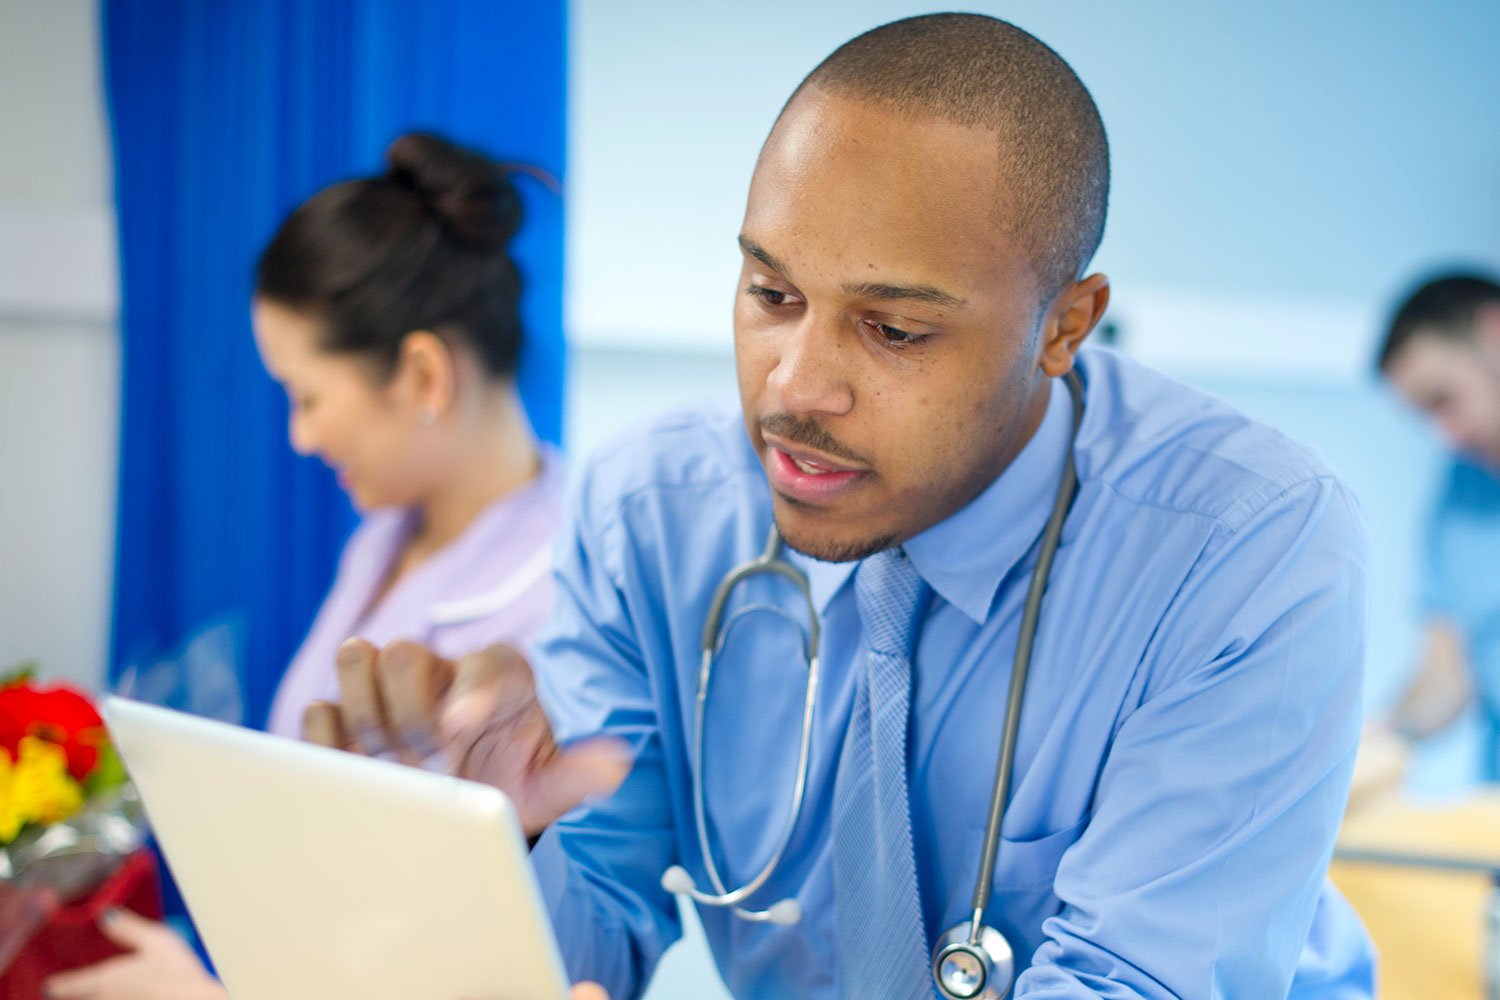 Supporting organisations to achieve medical workforce efficiencies